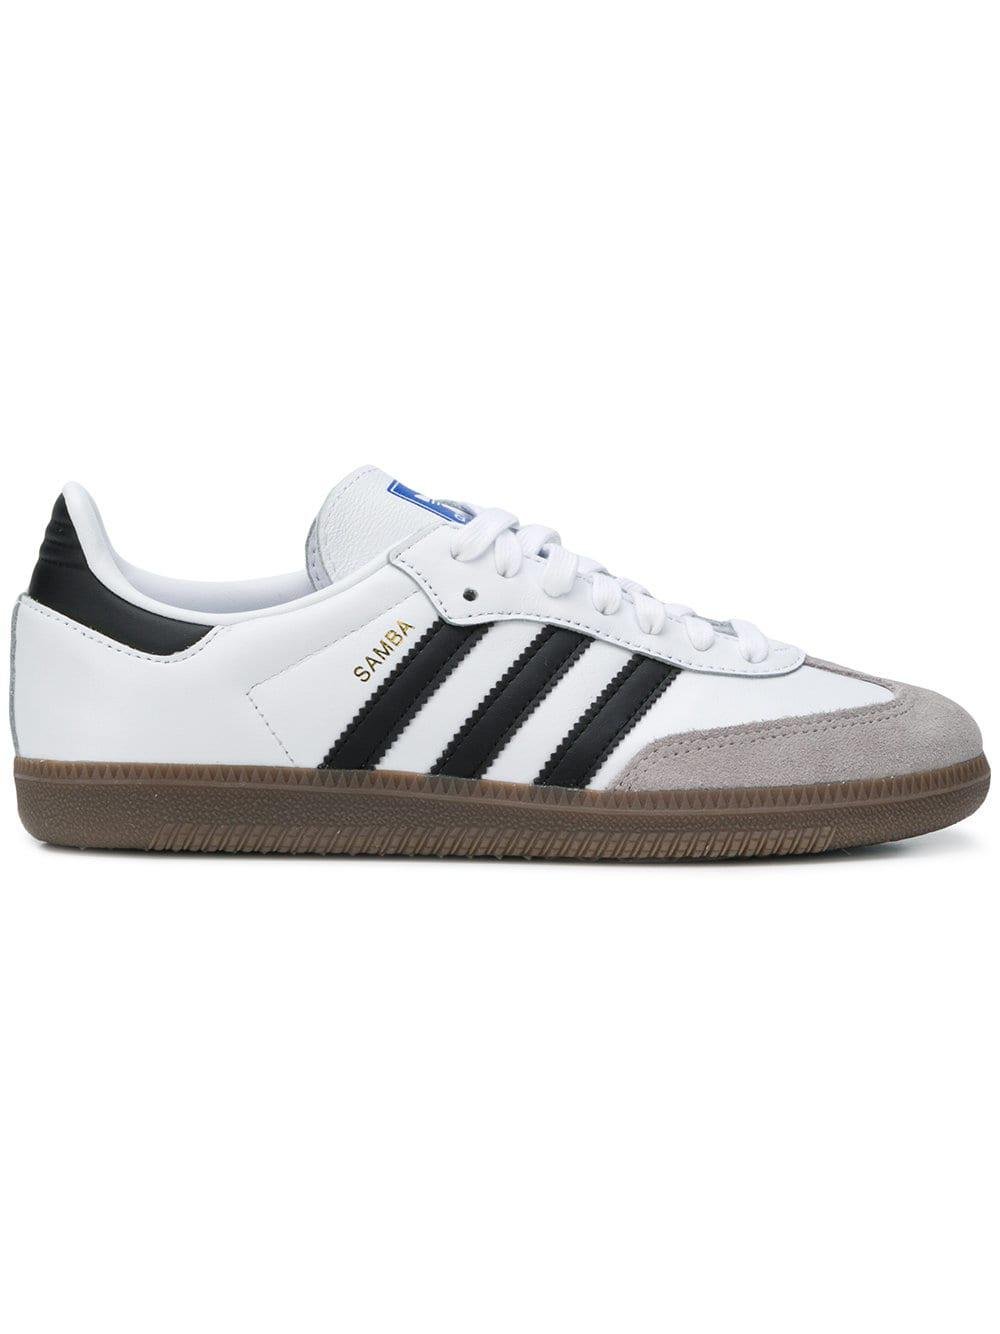 haar delen Haas adidas Women's Samba Og Leather & Suede Lace Up Sneakers in White | Lyst